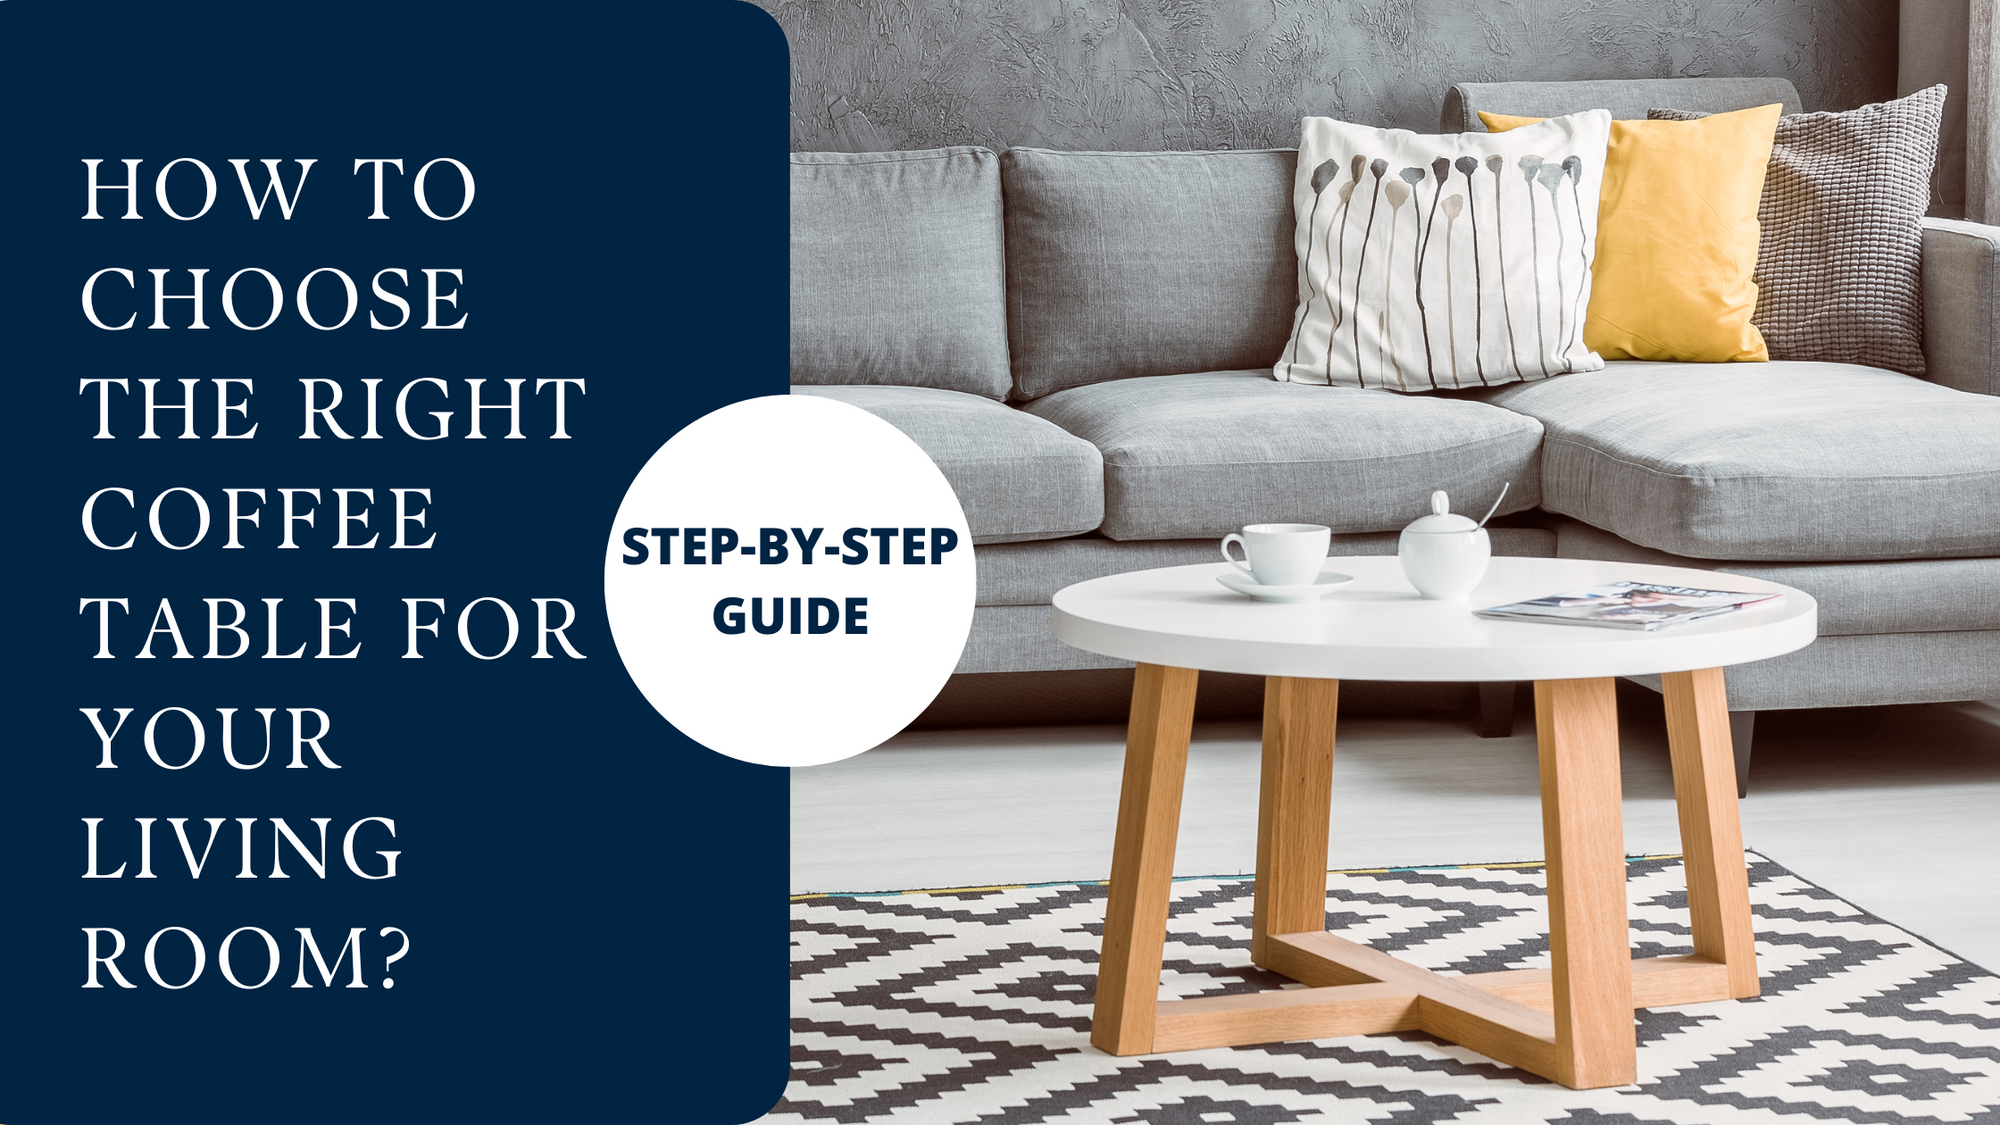 How To Choose The Right Coffee Table For Your Living Room?